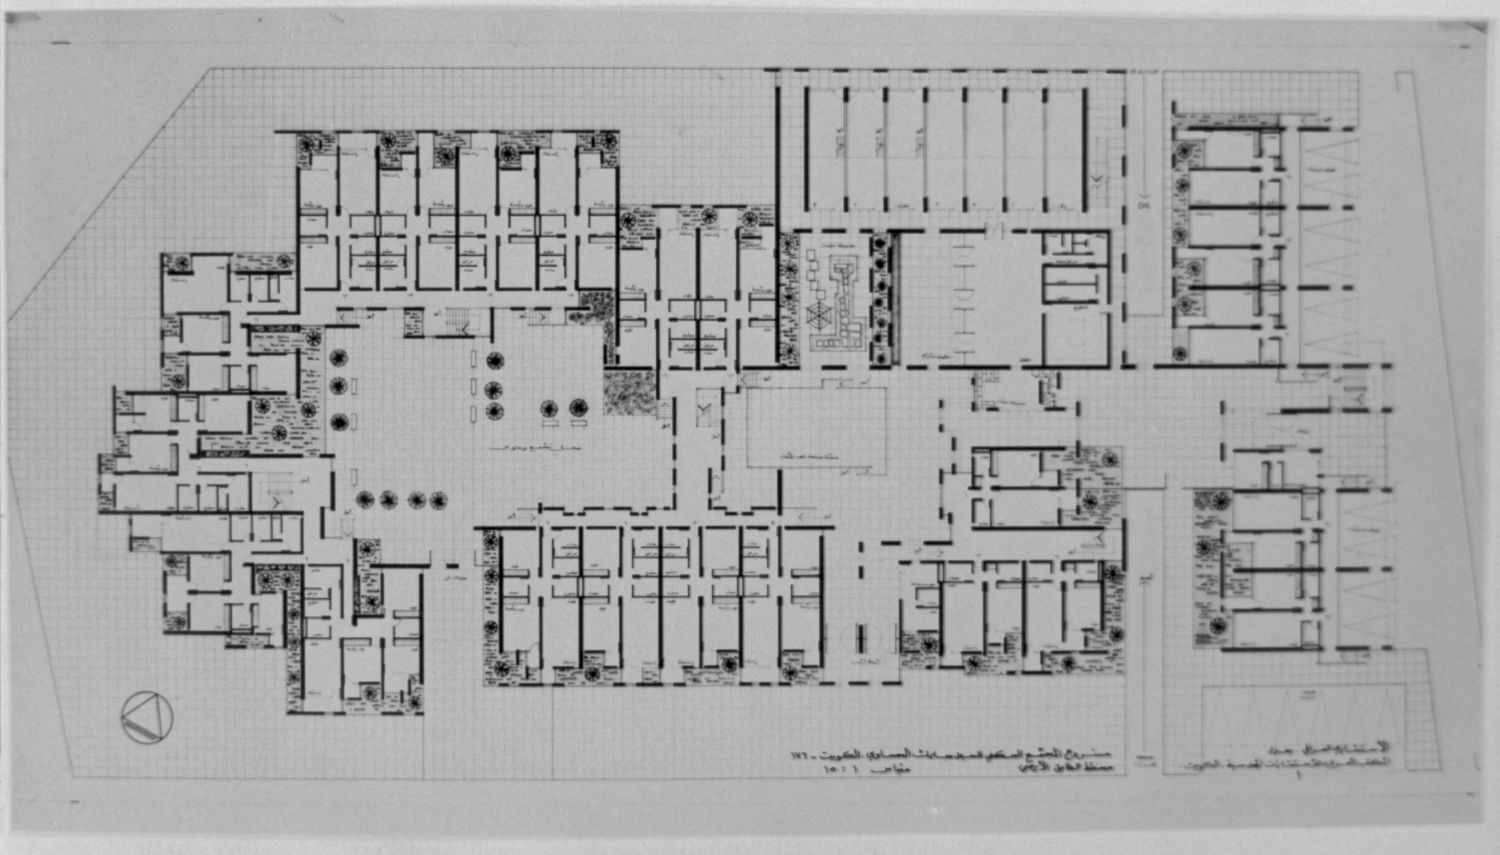 Ground floor of apartments (possibly an early version of the plan not adopted for final construction).